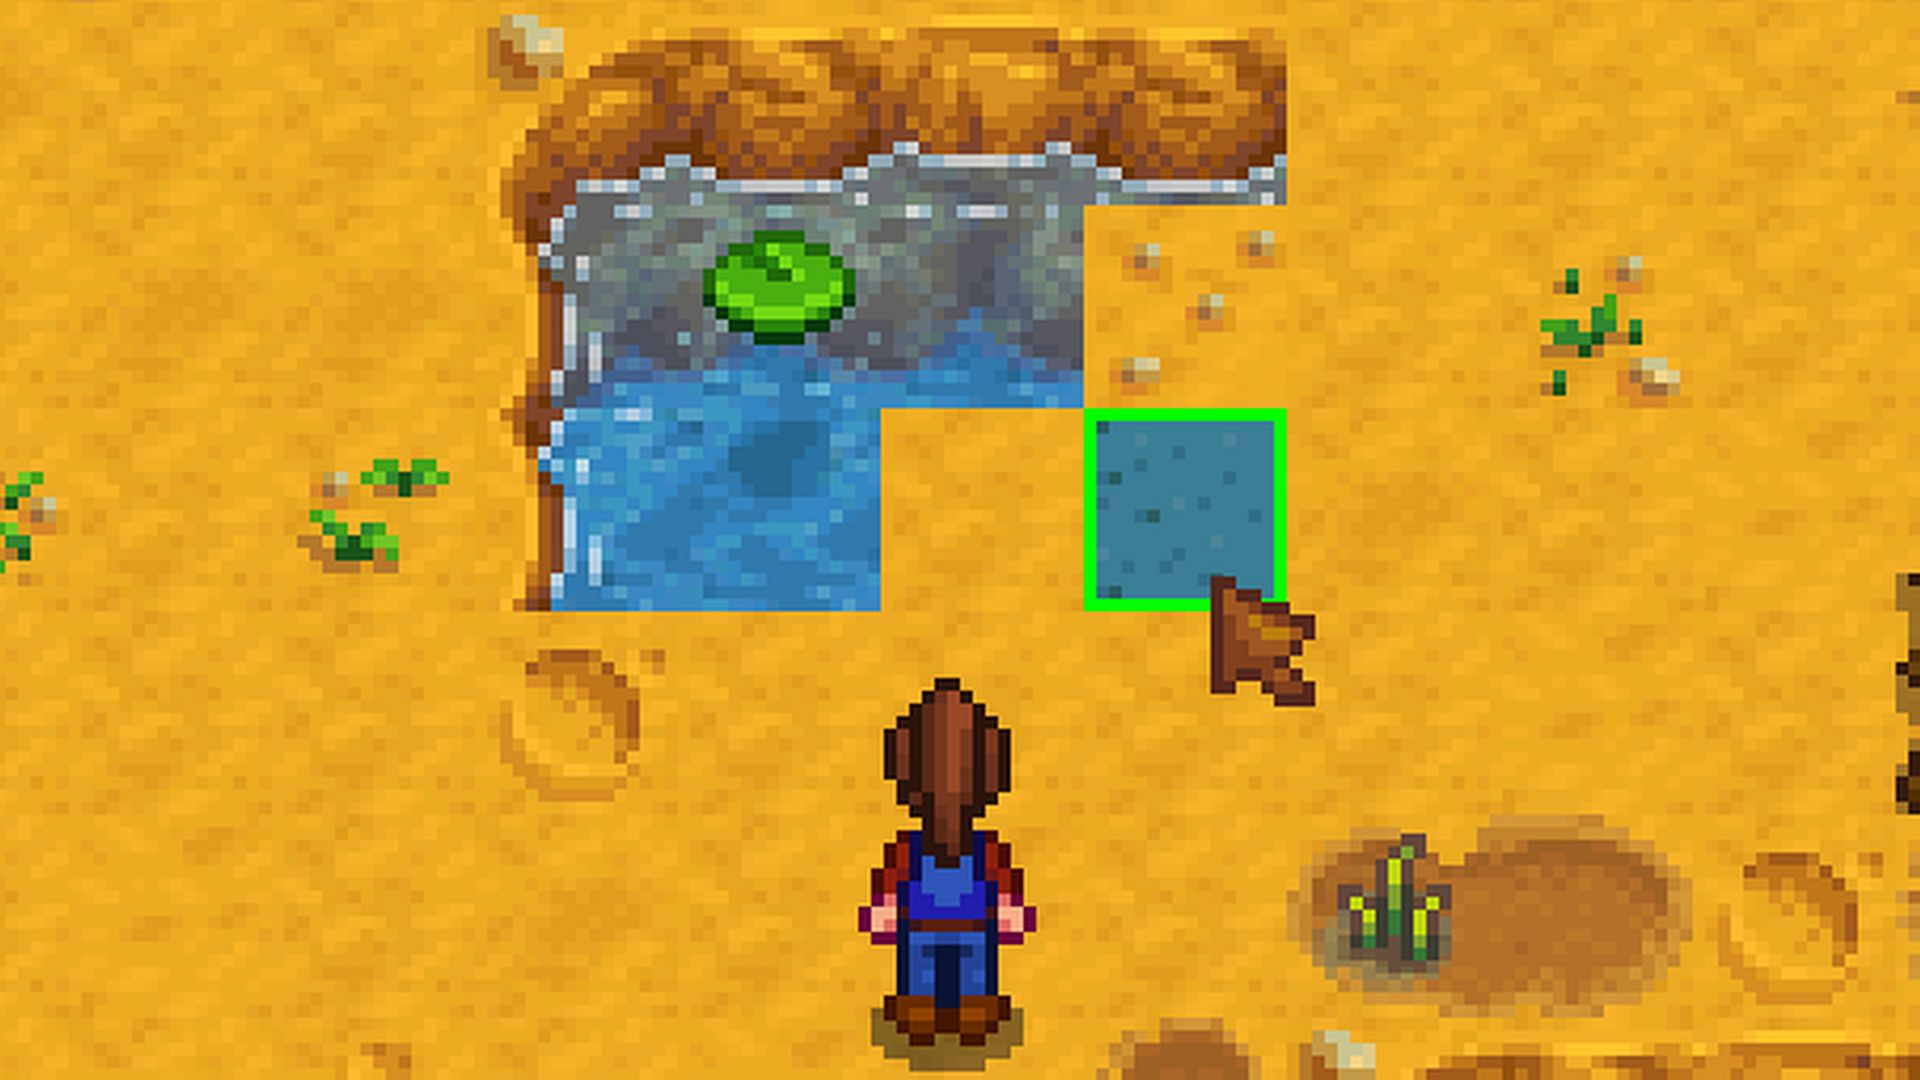 This super handy Stardew Valley mod lets you edit the map in-game